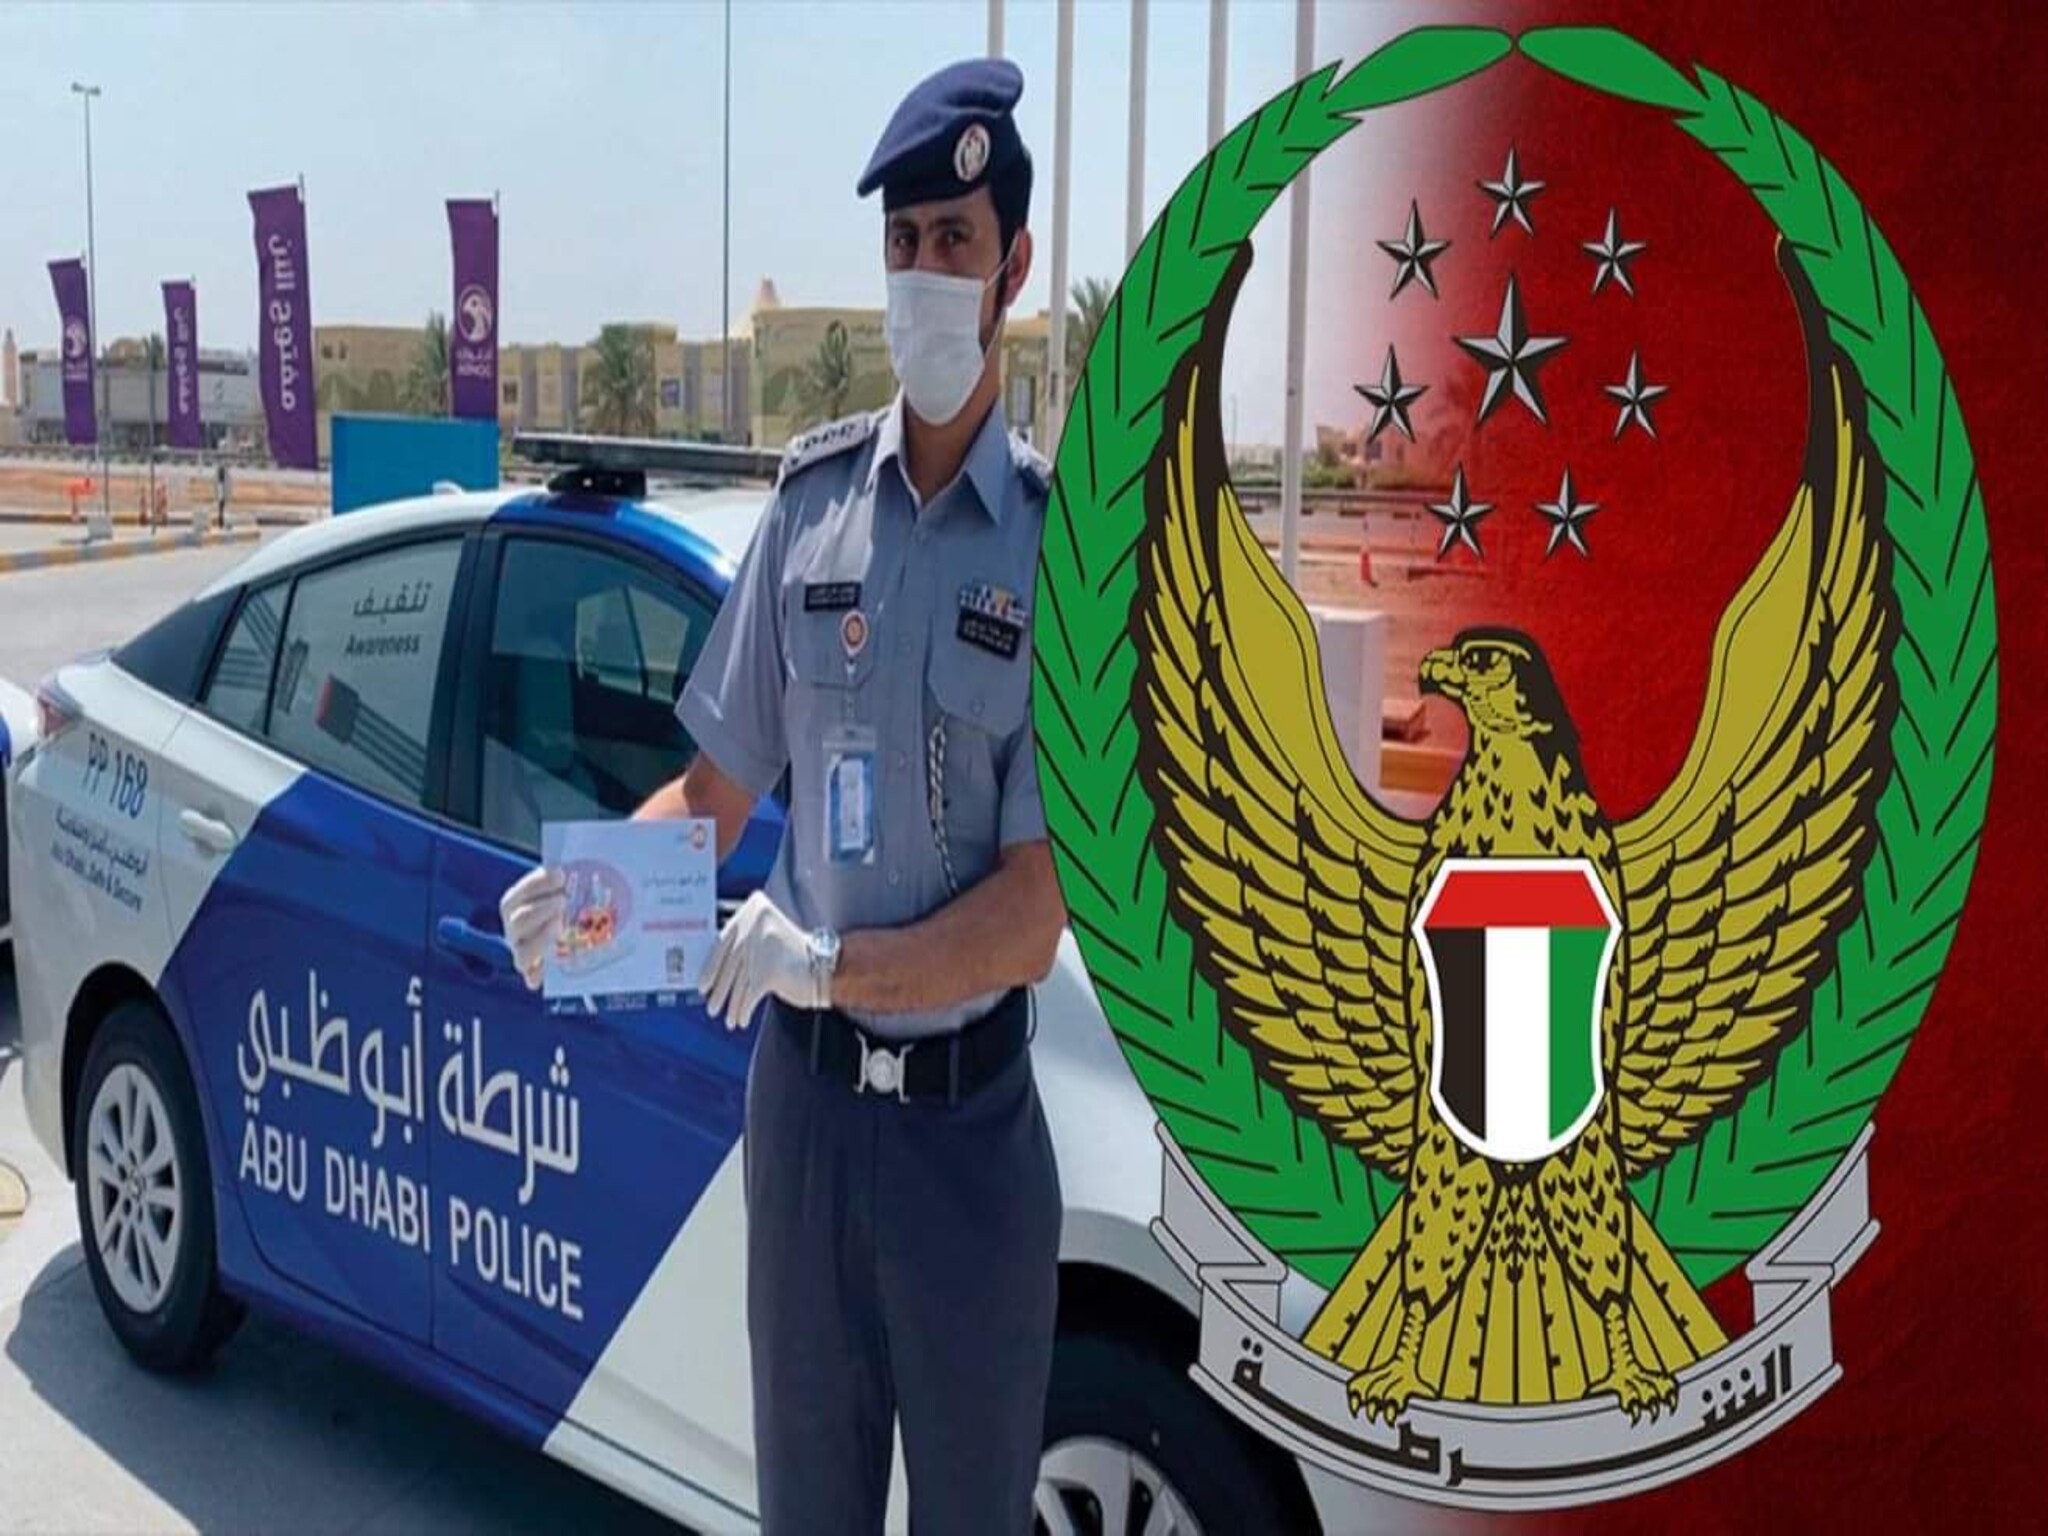 Important notice from Abu Dhabi Police regarding a 50% discount on the value of violations